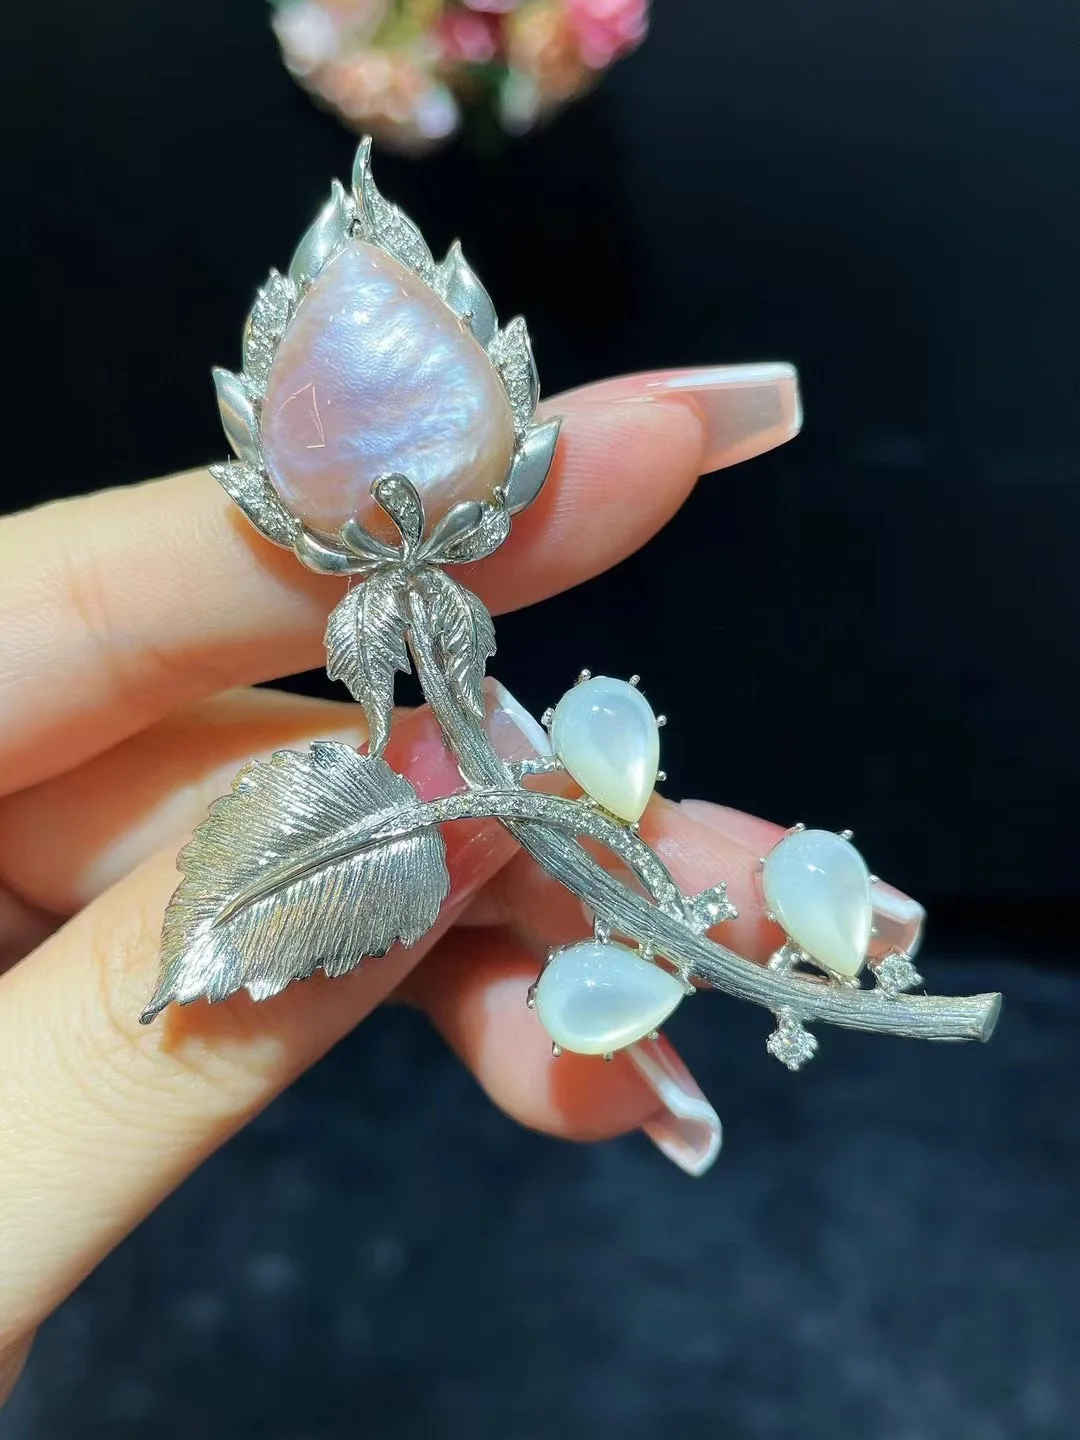 S051e8d236b894e5b95be6ff25209bbafH 18K white gold with diamond leaf brooch fine women jewelry natural color free shipping